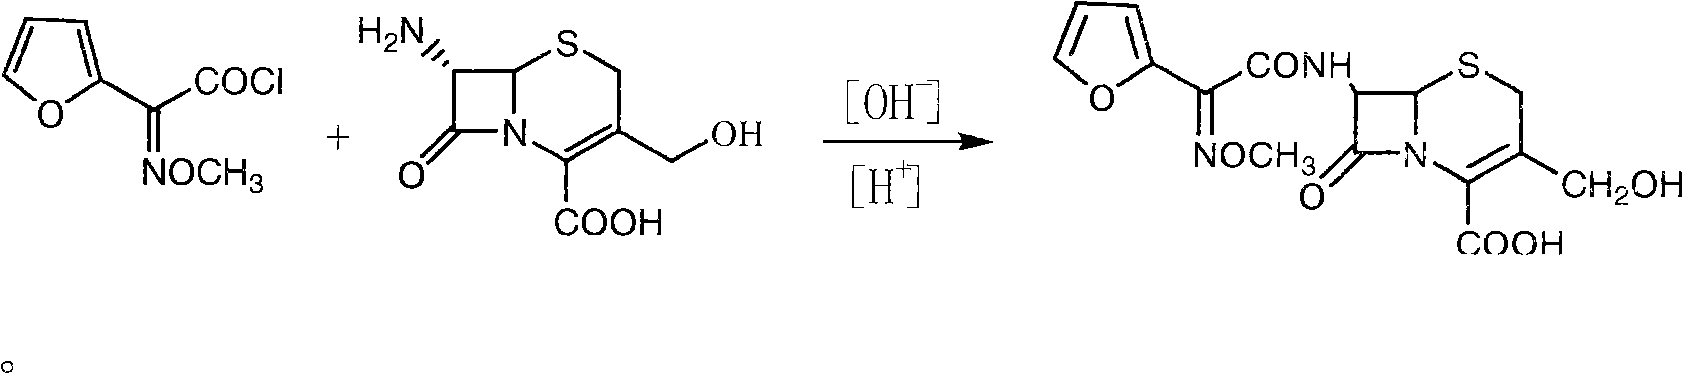 Novel process for synthesizing 3-deacetyl cefuroxime sodium (DCCF)